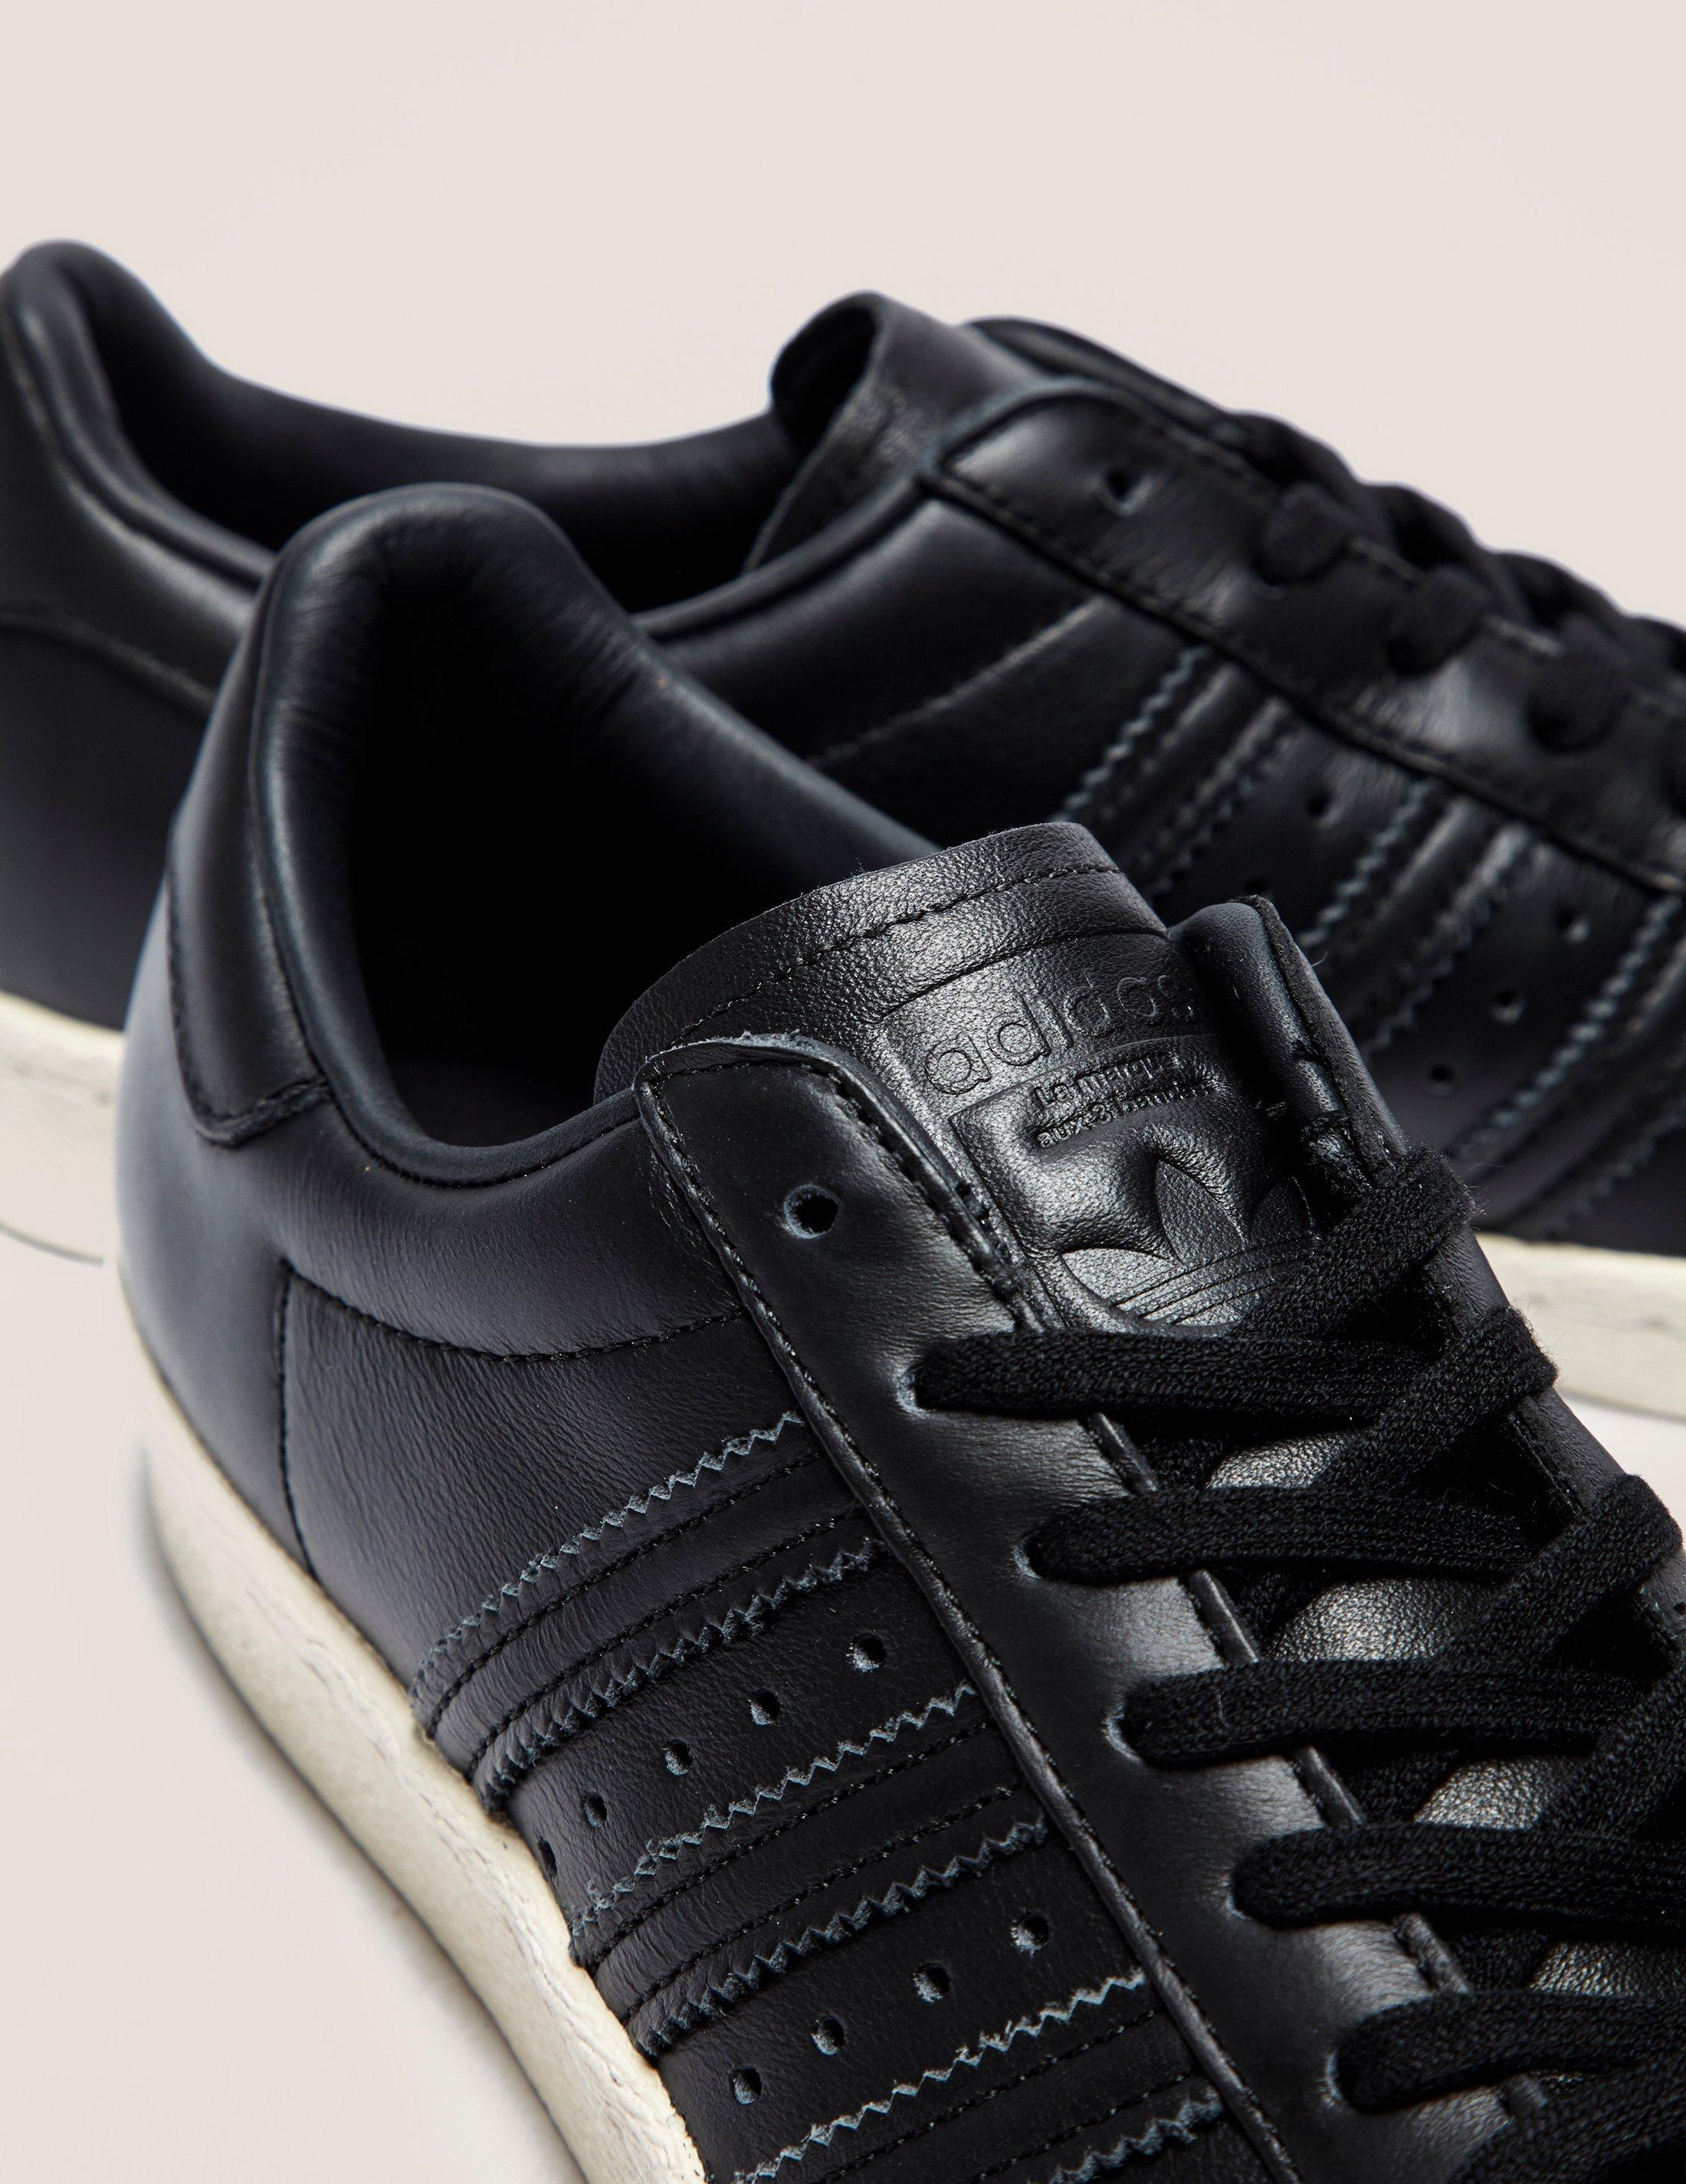 mager Silicon Generalife adidas Originals Leather Superstar 80s Metal Toe in Black - Lyst